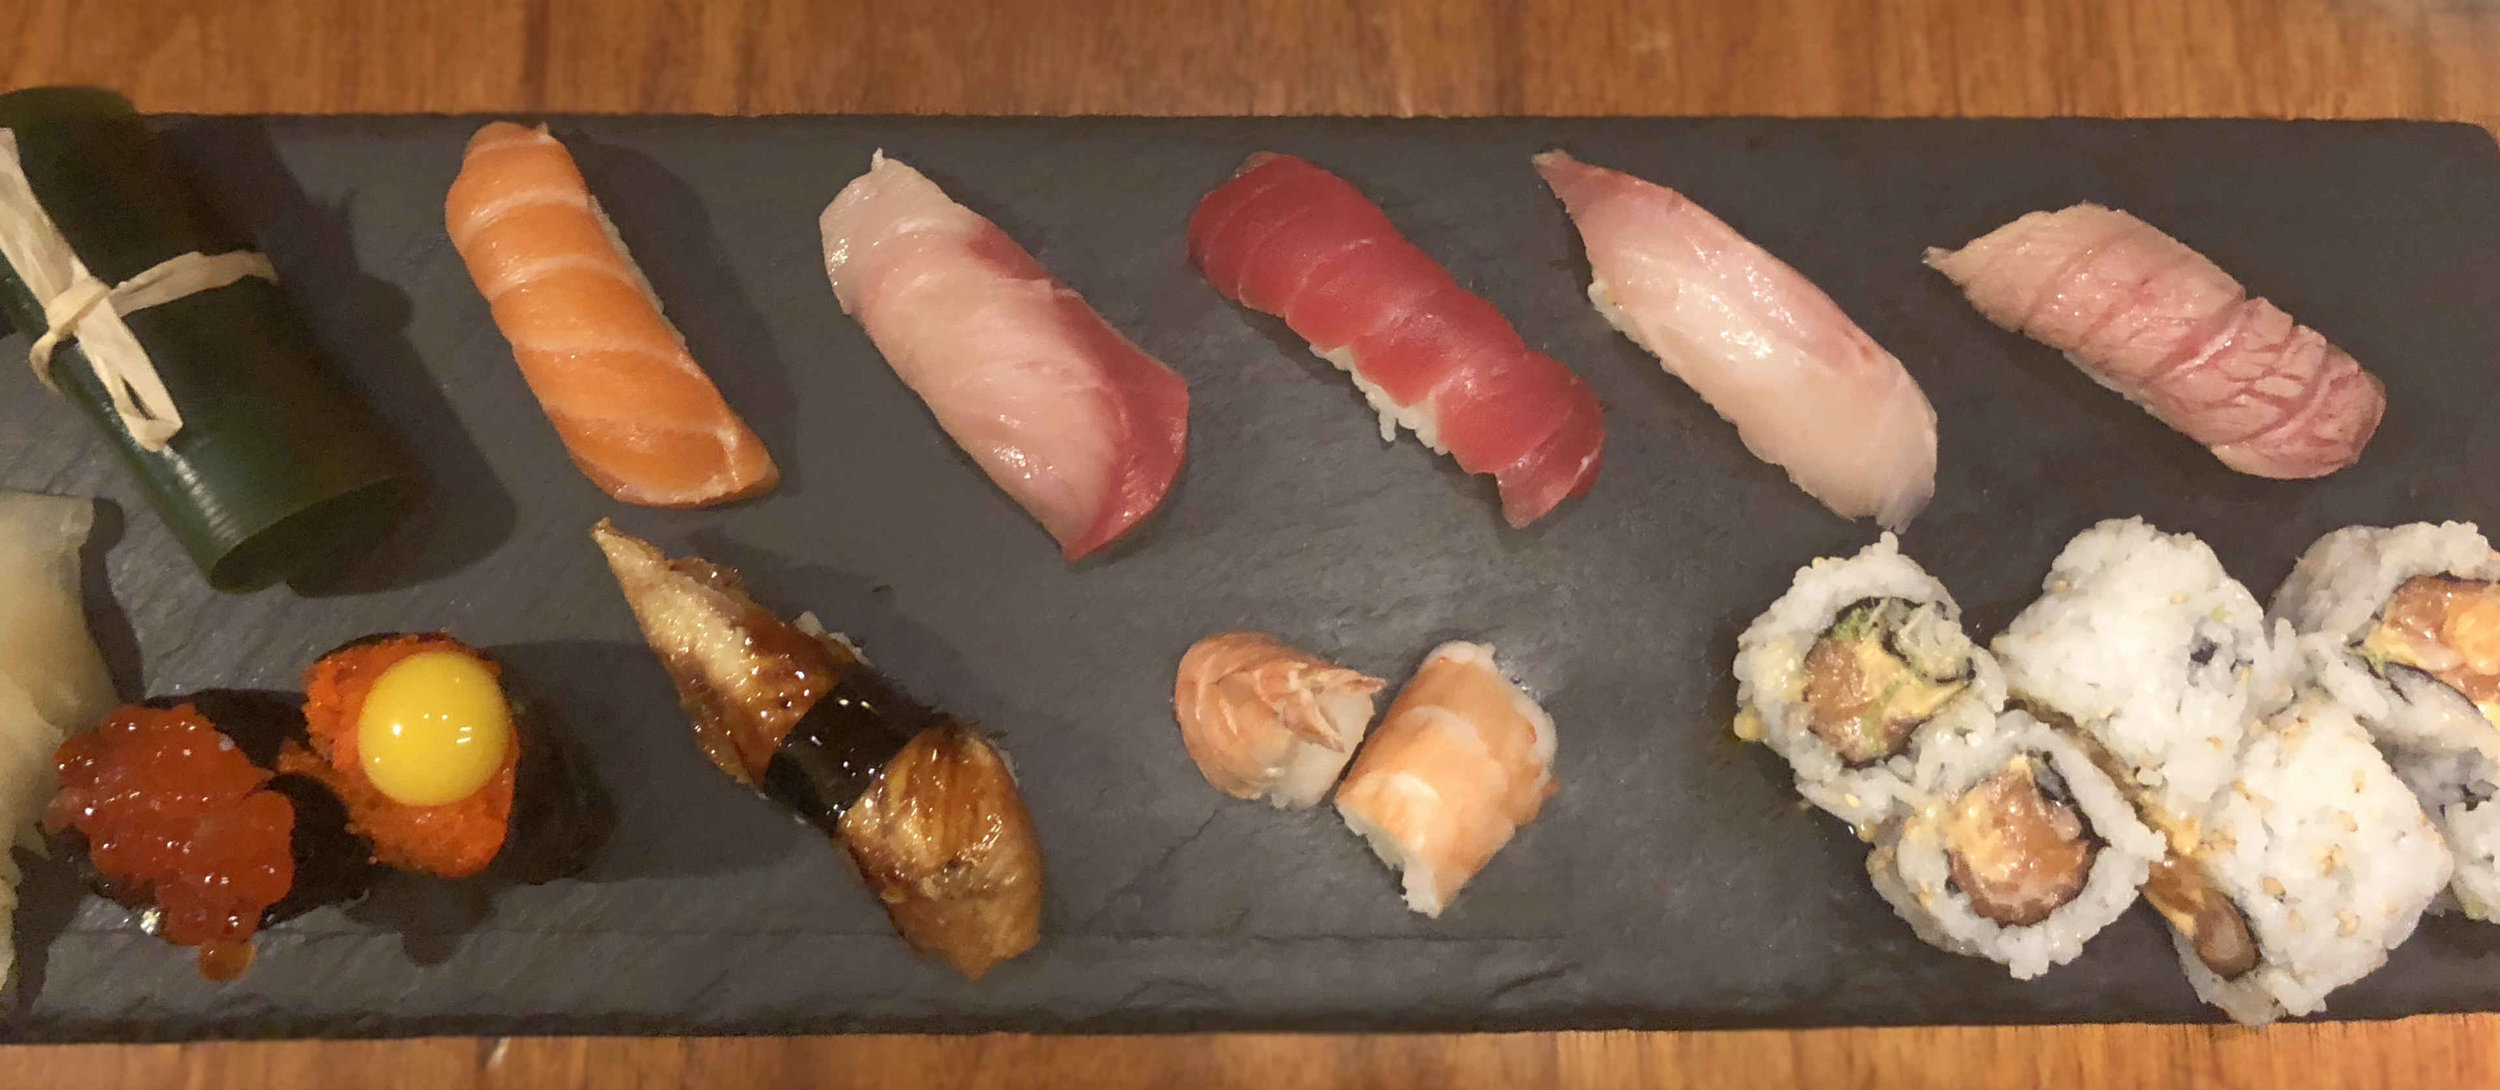 $39 sushi special